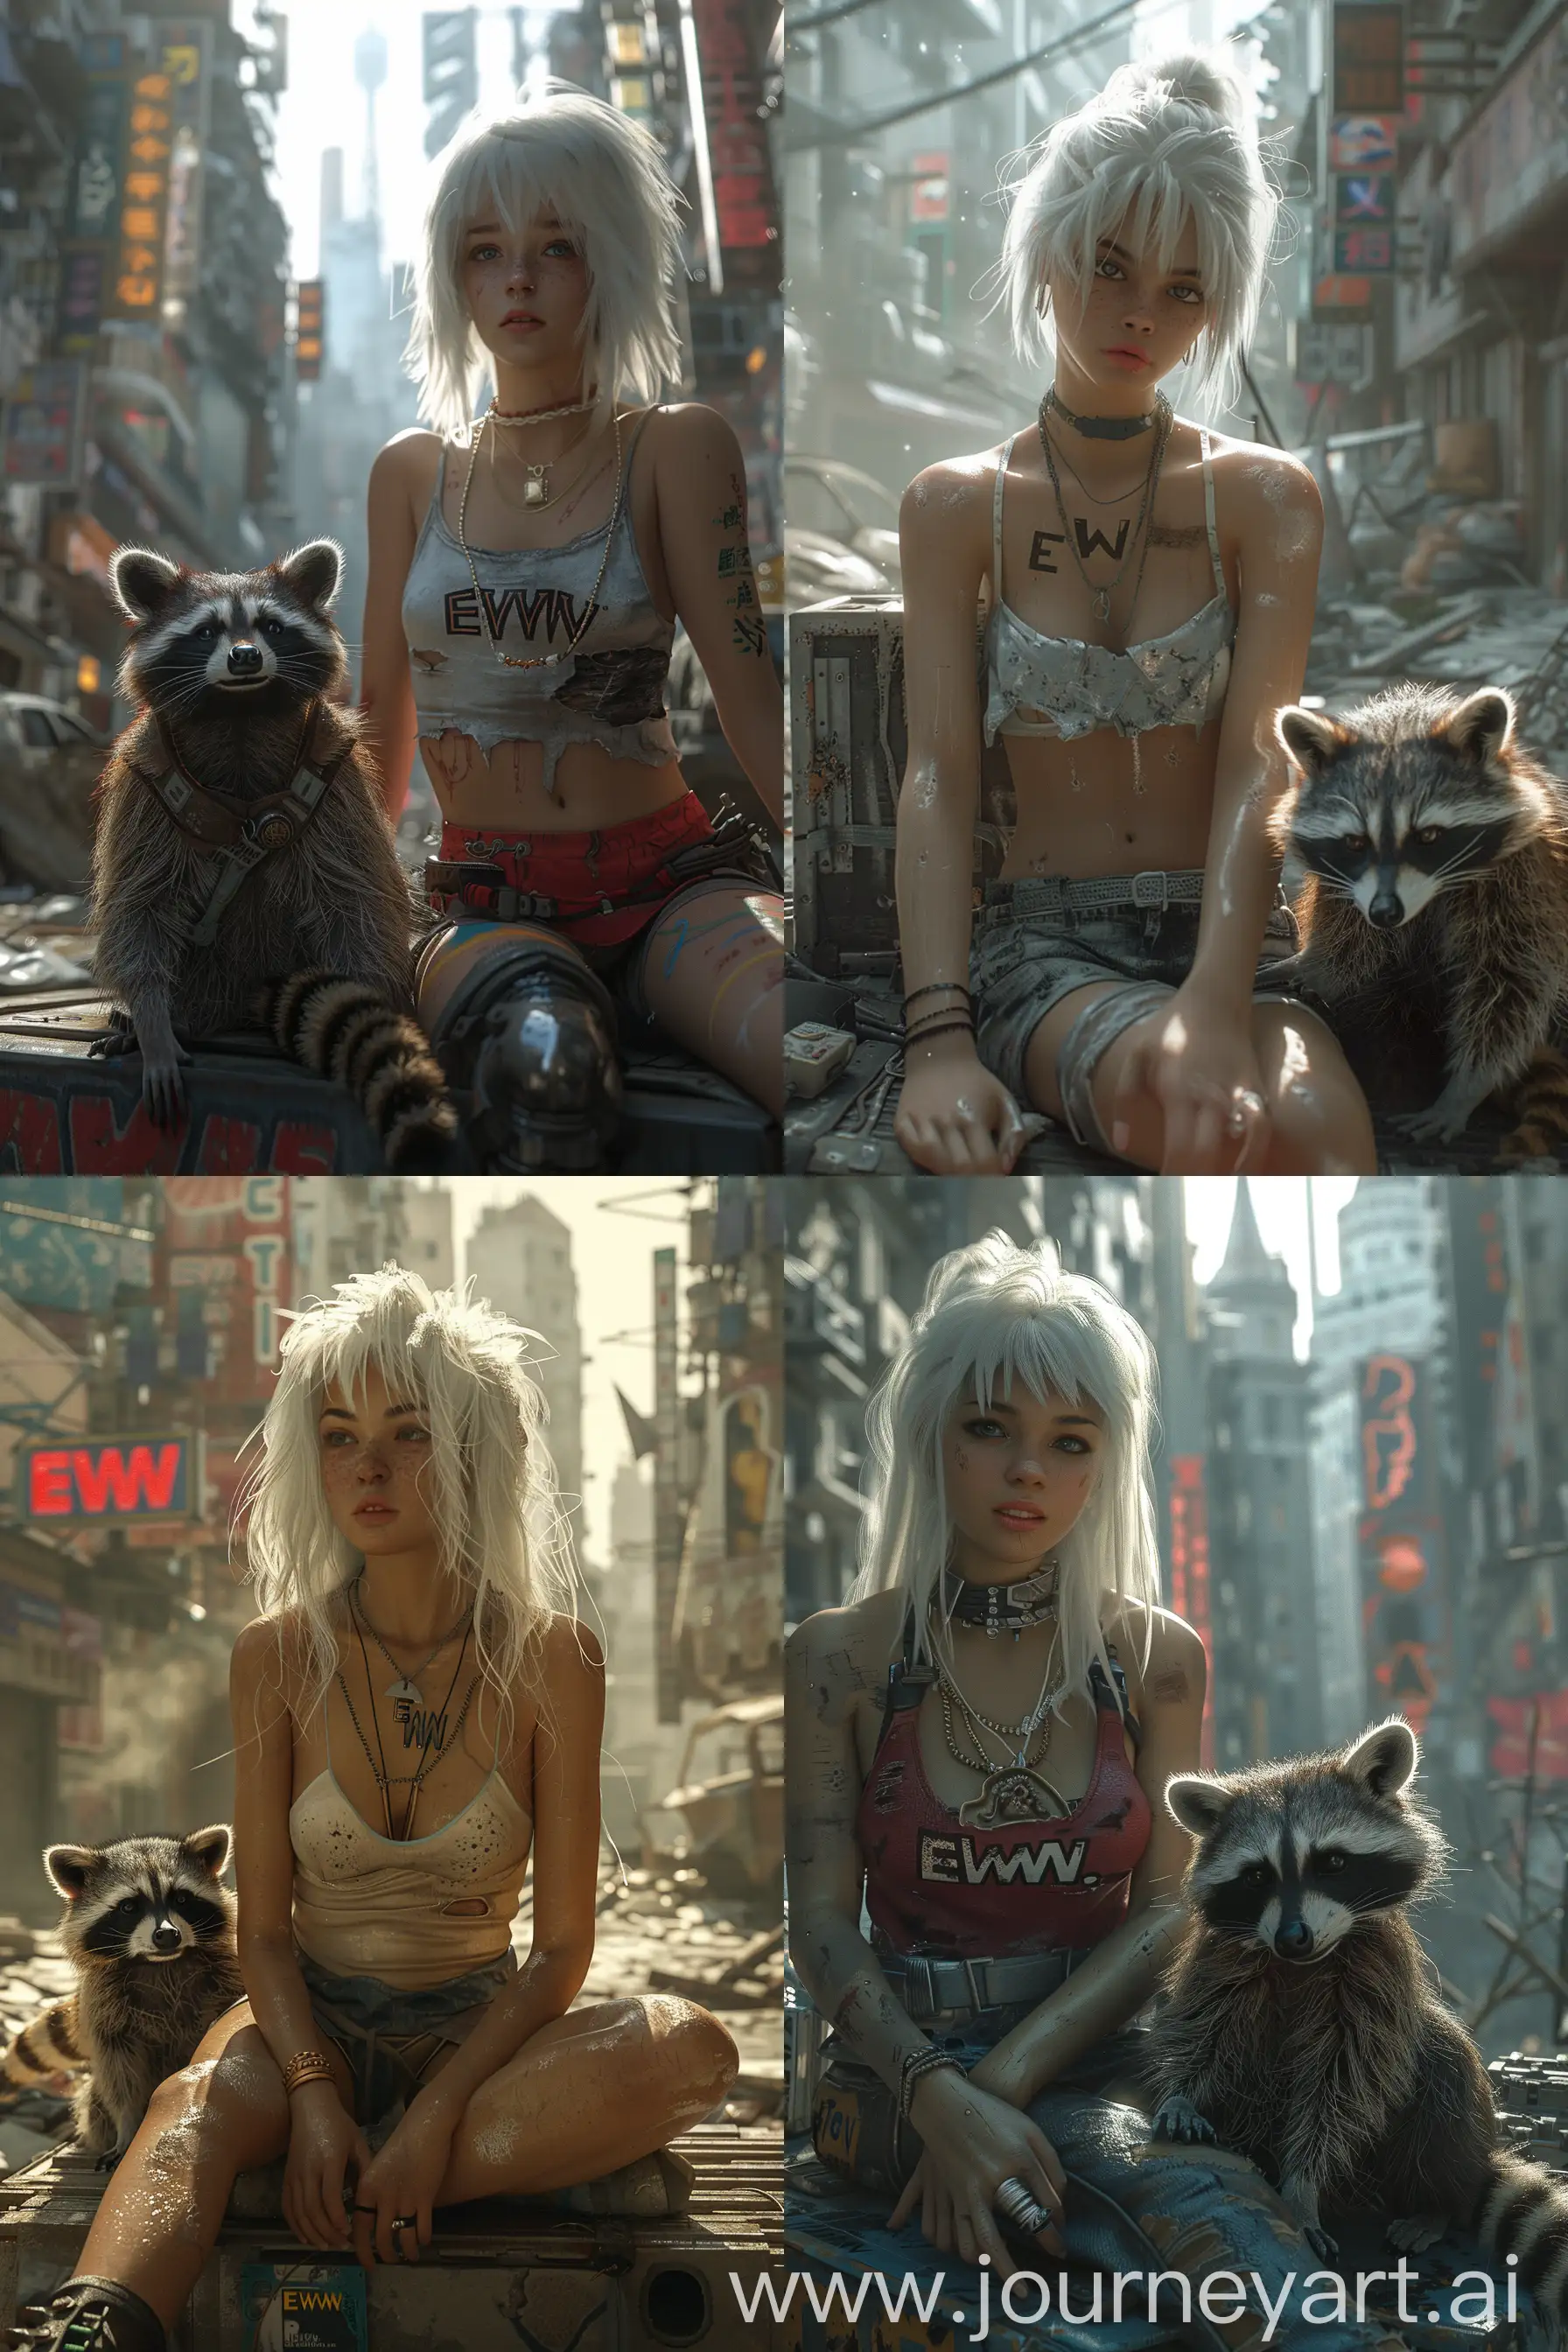 PostApocalyptic-WhiteHaired-Girl-with-Raccoon-Companion-in-Urban-Ruins